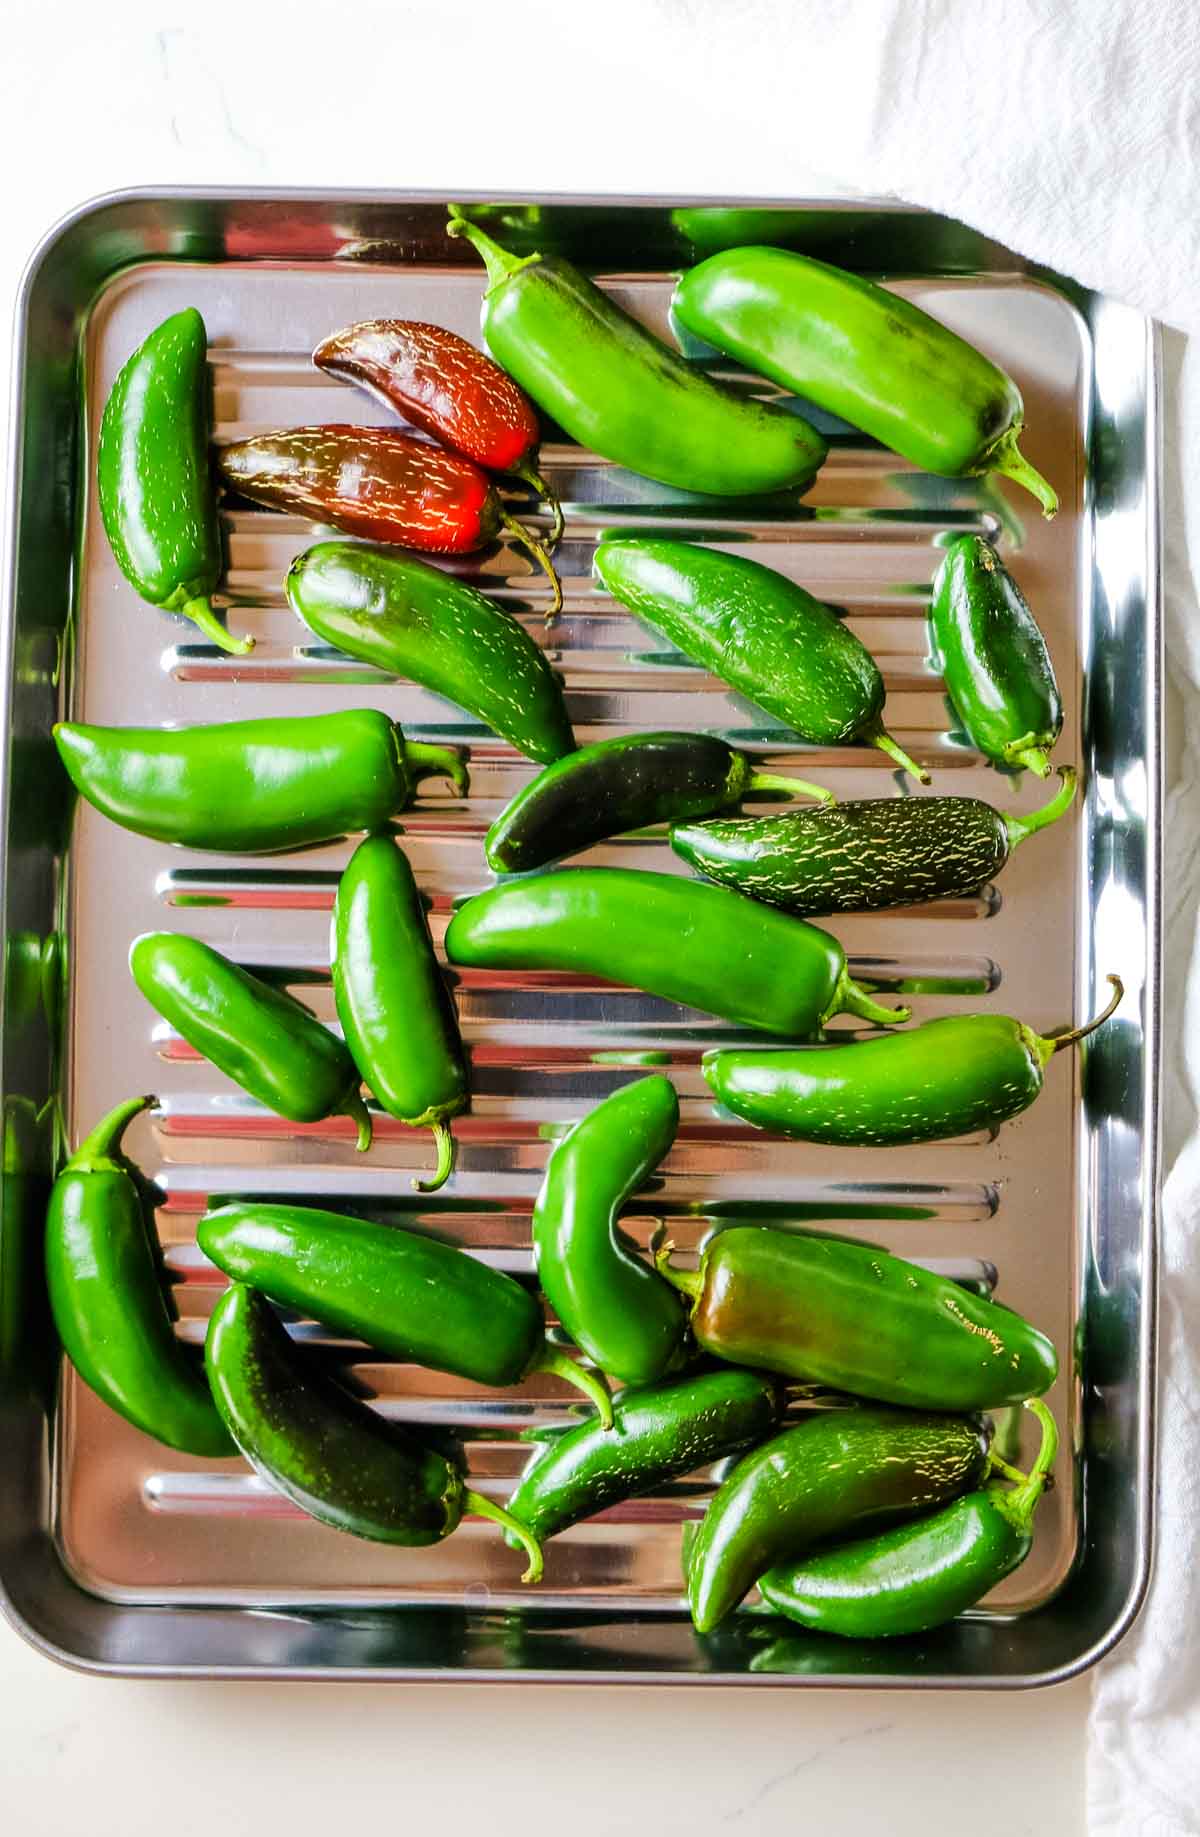 jalapeno peppers on a sheet pan tray